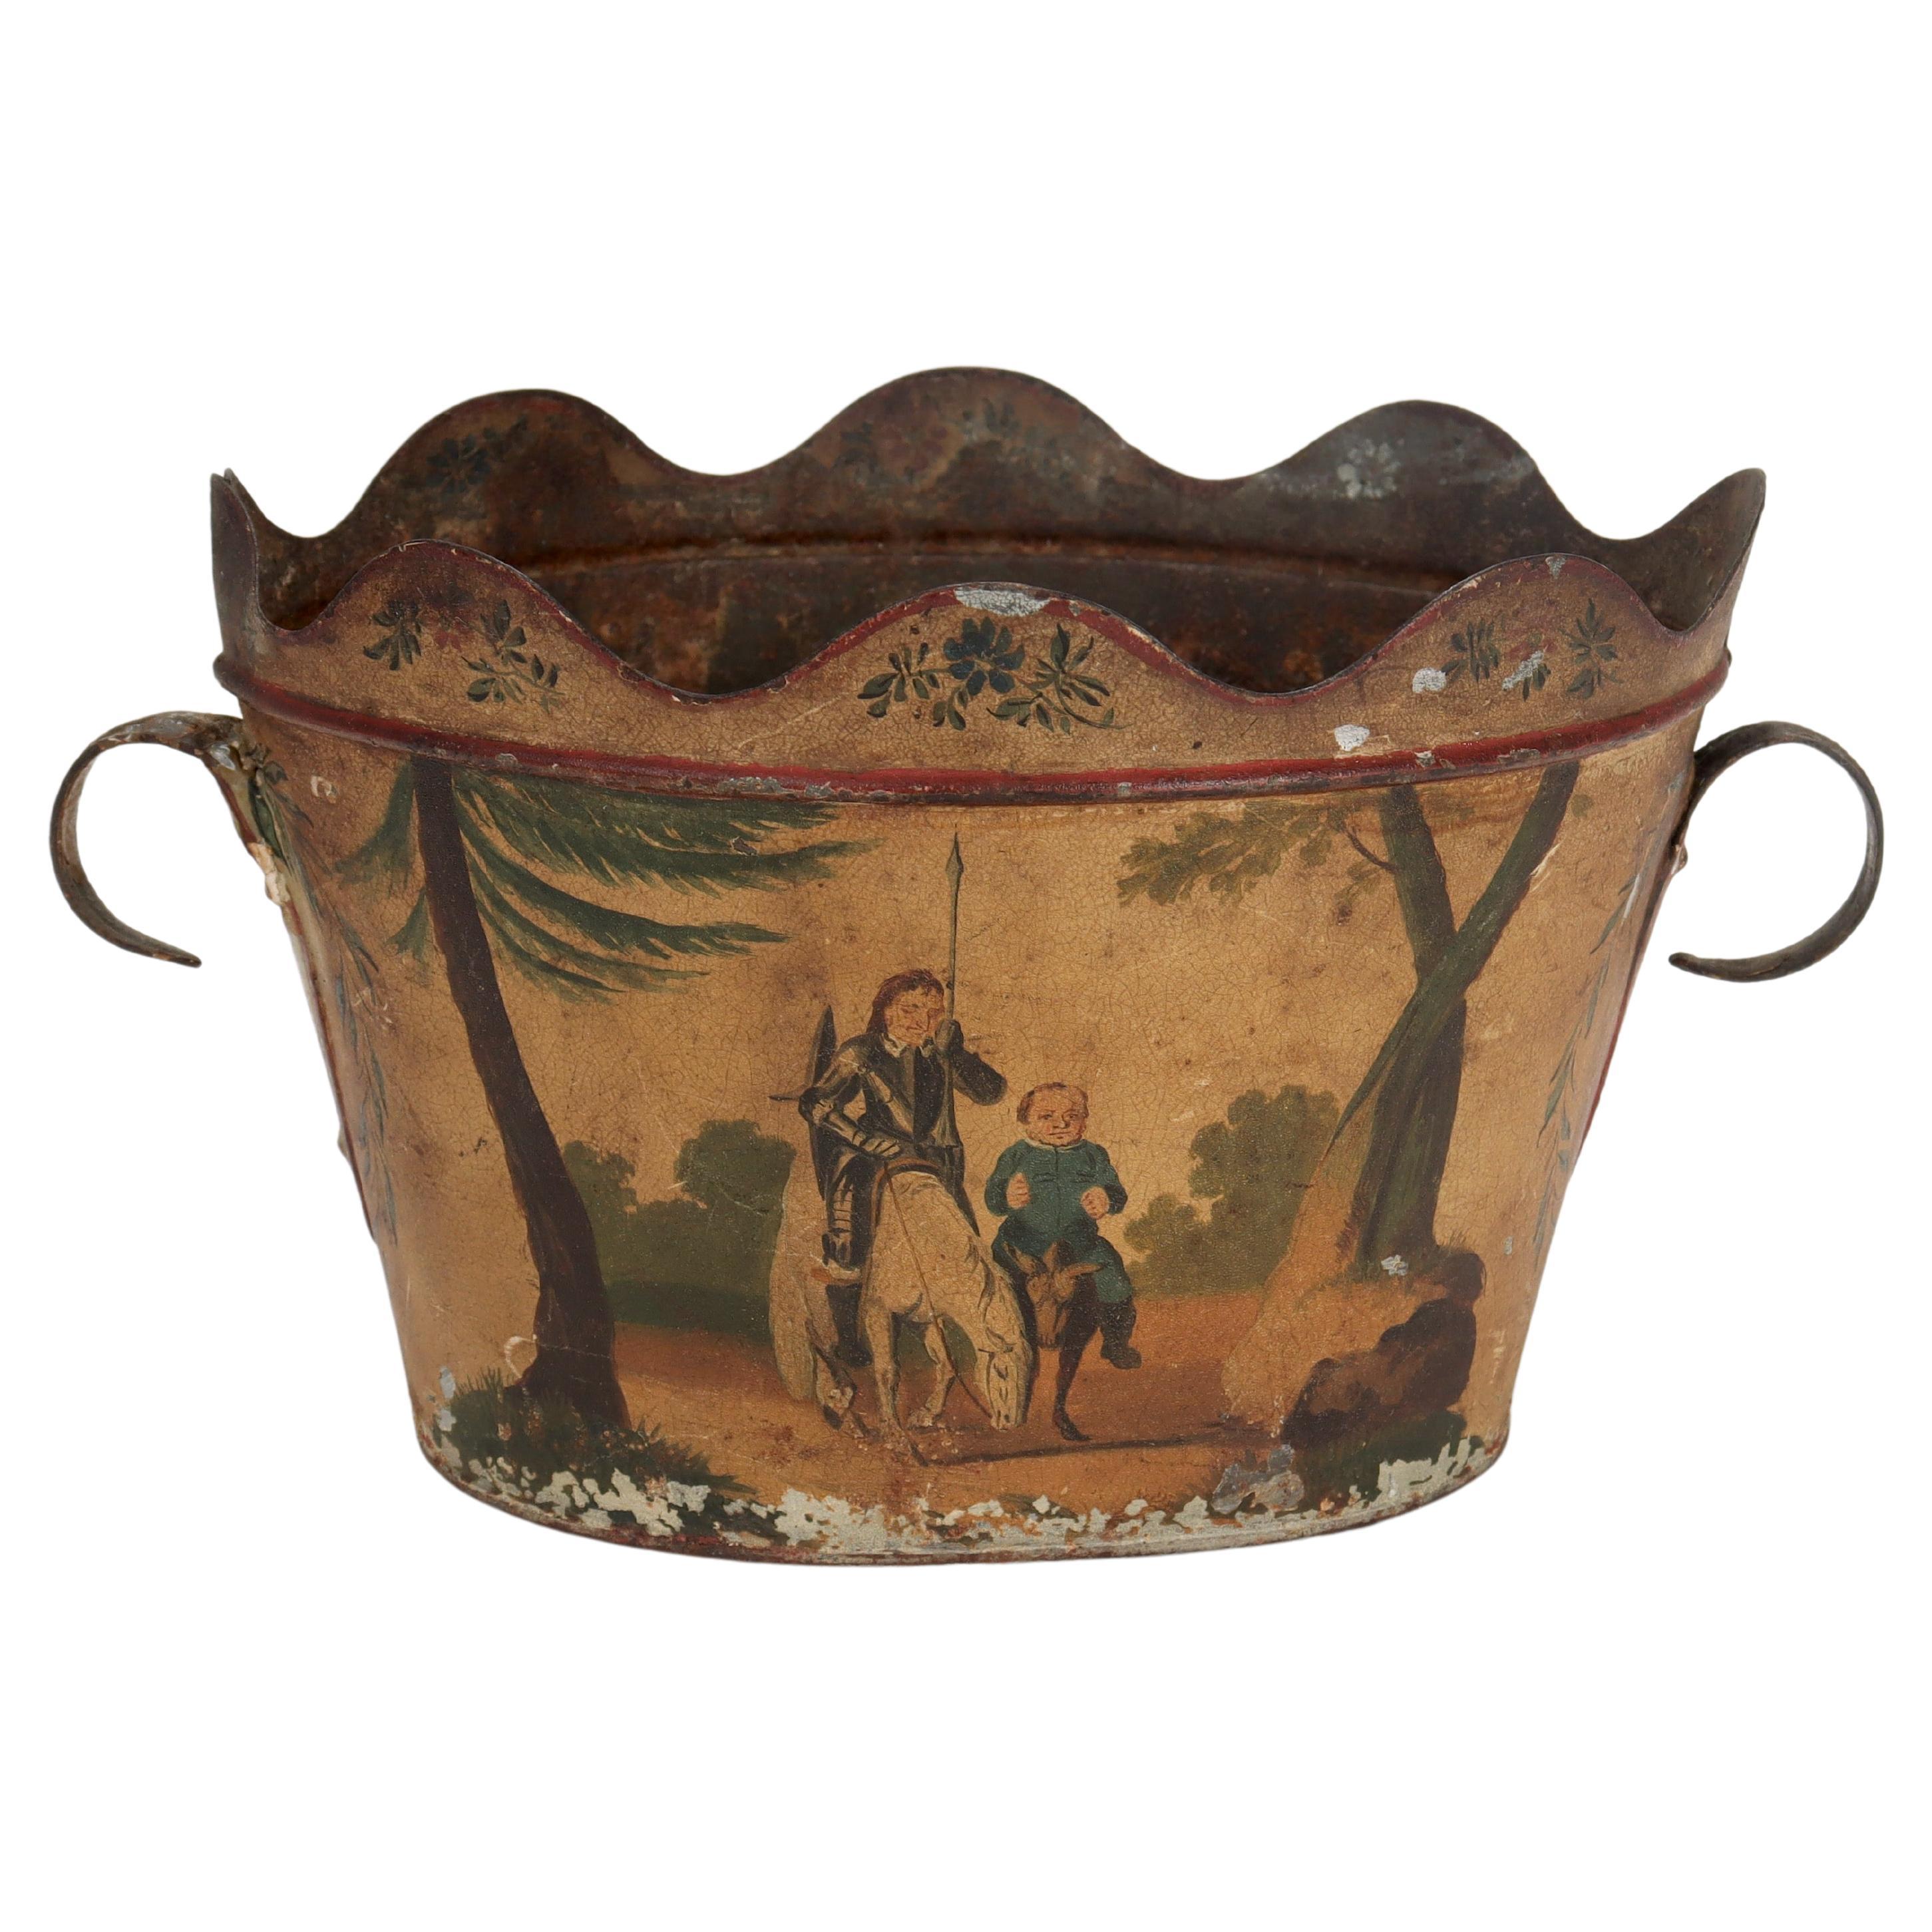 Antique French Toleware Cachepot or Planter Painted with a Don Quixote Scene